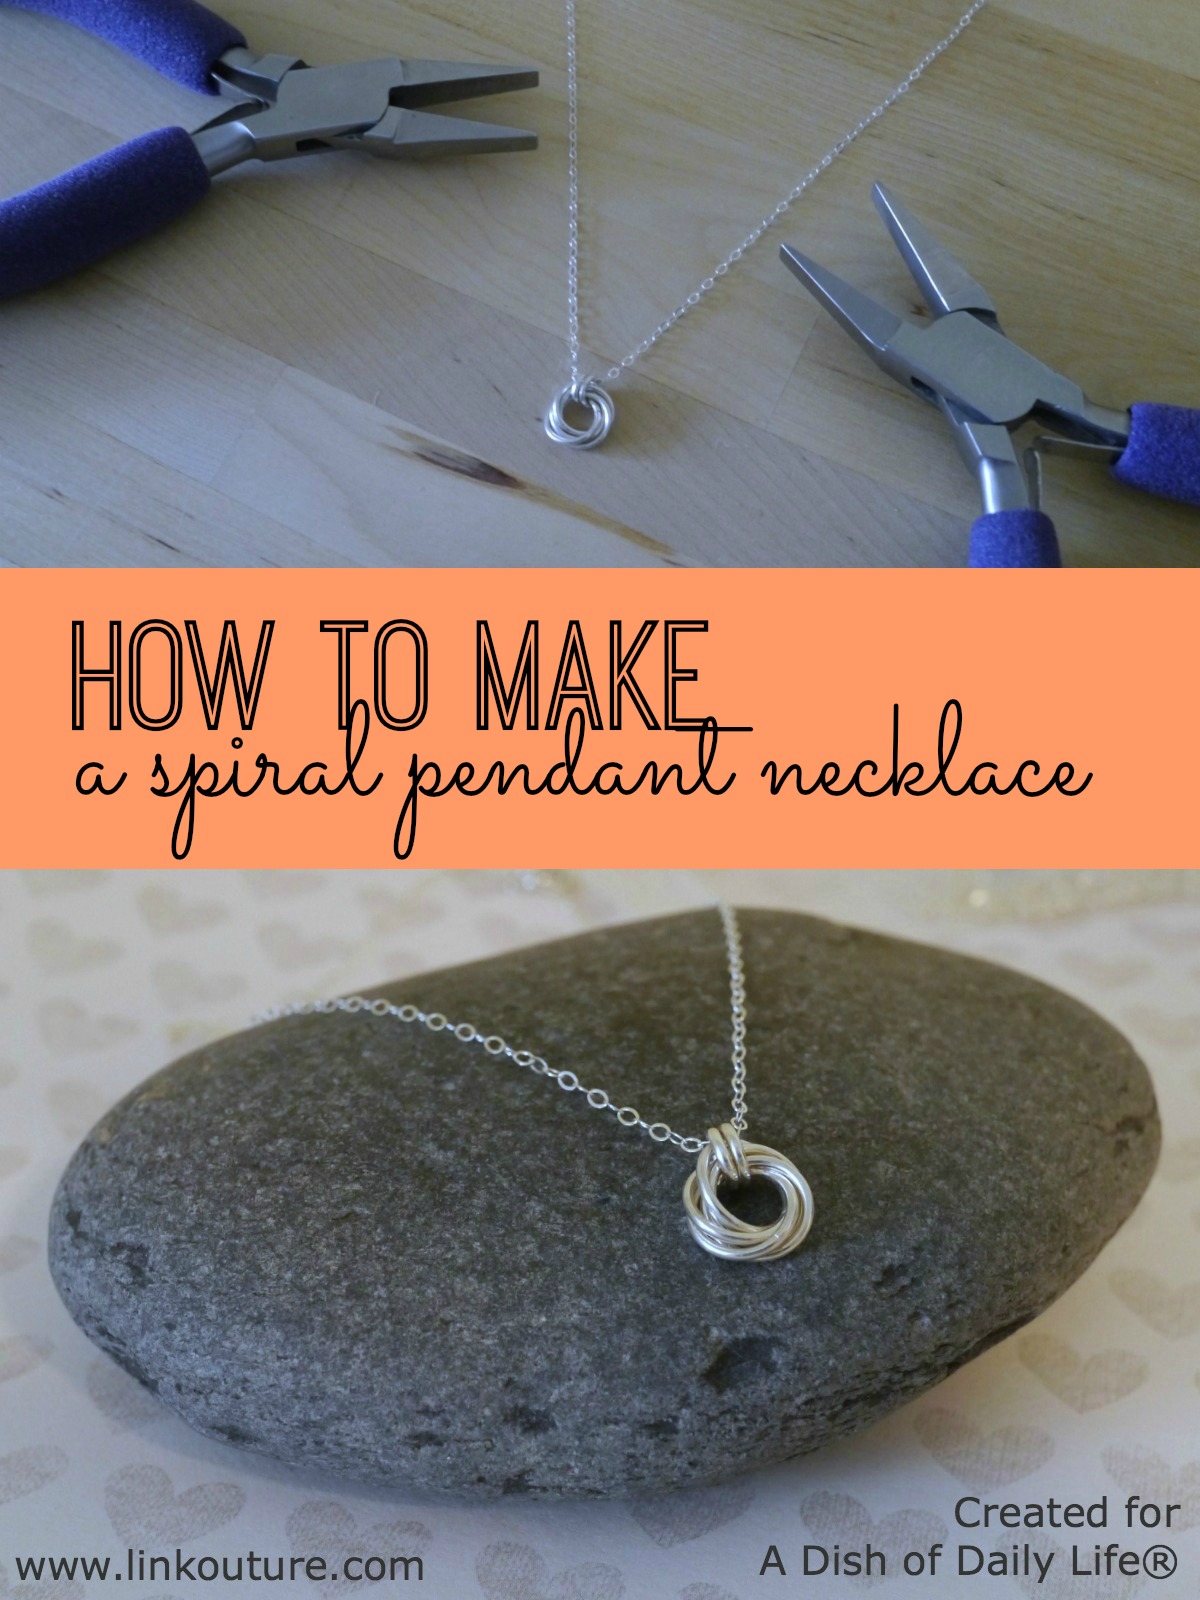 This DIY spiral pendant necklace jewelry tutorial is incredibly easy to make. It makes for a wonderful gift idea for Mother's Day or a special treat for yourself!